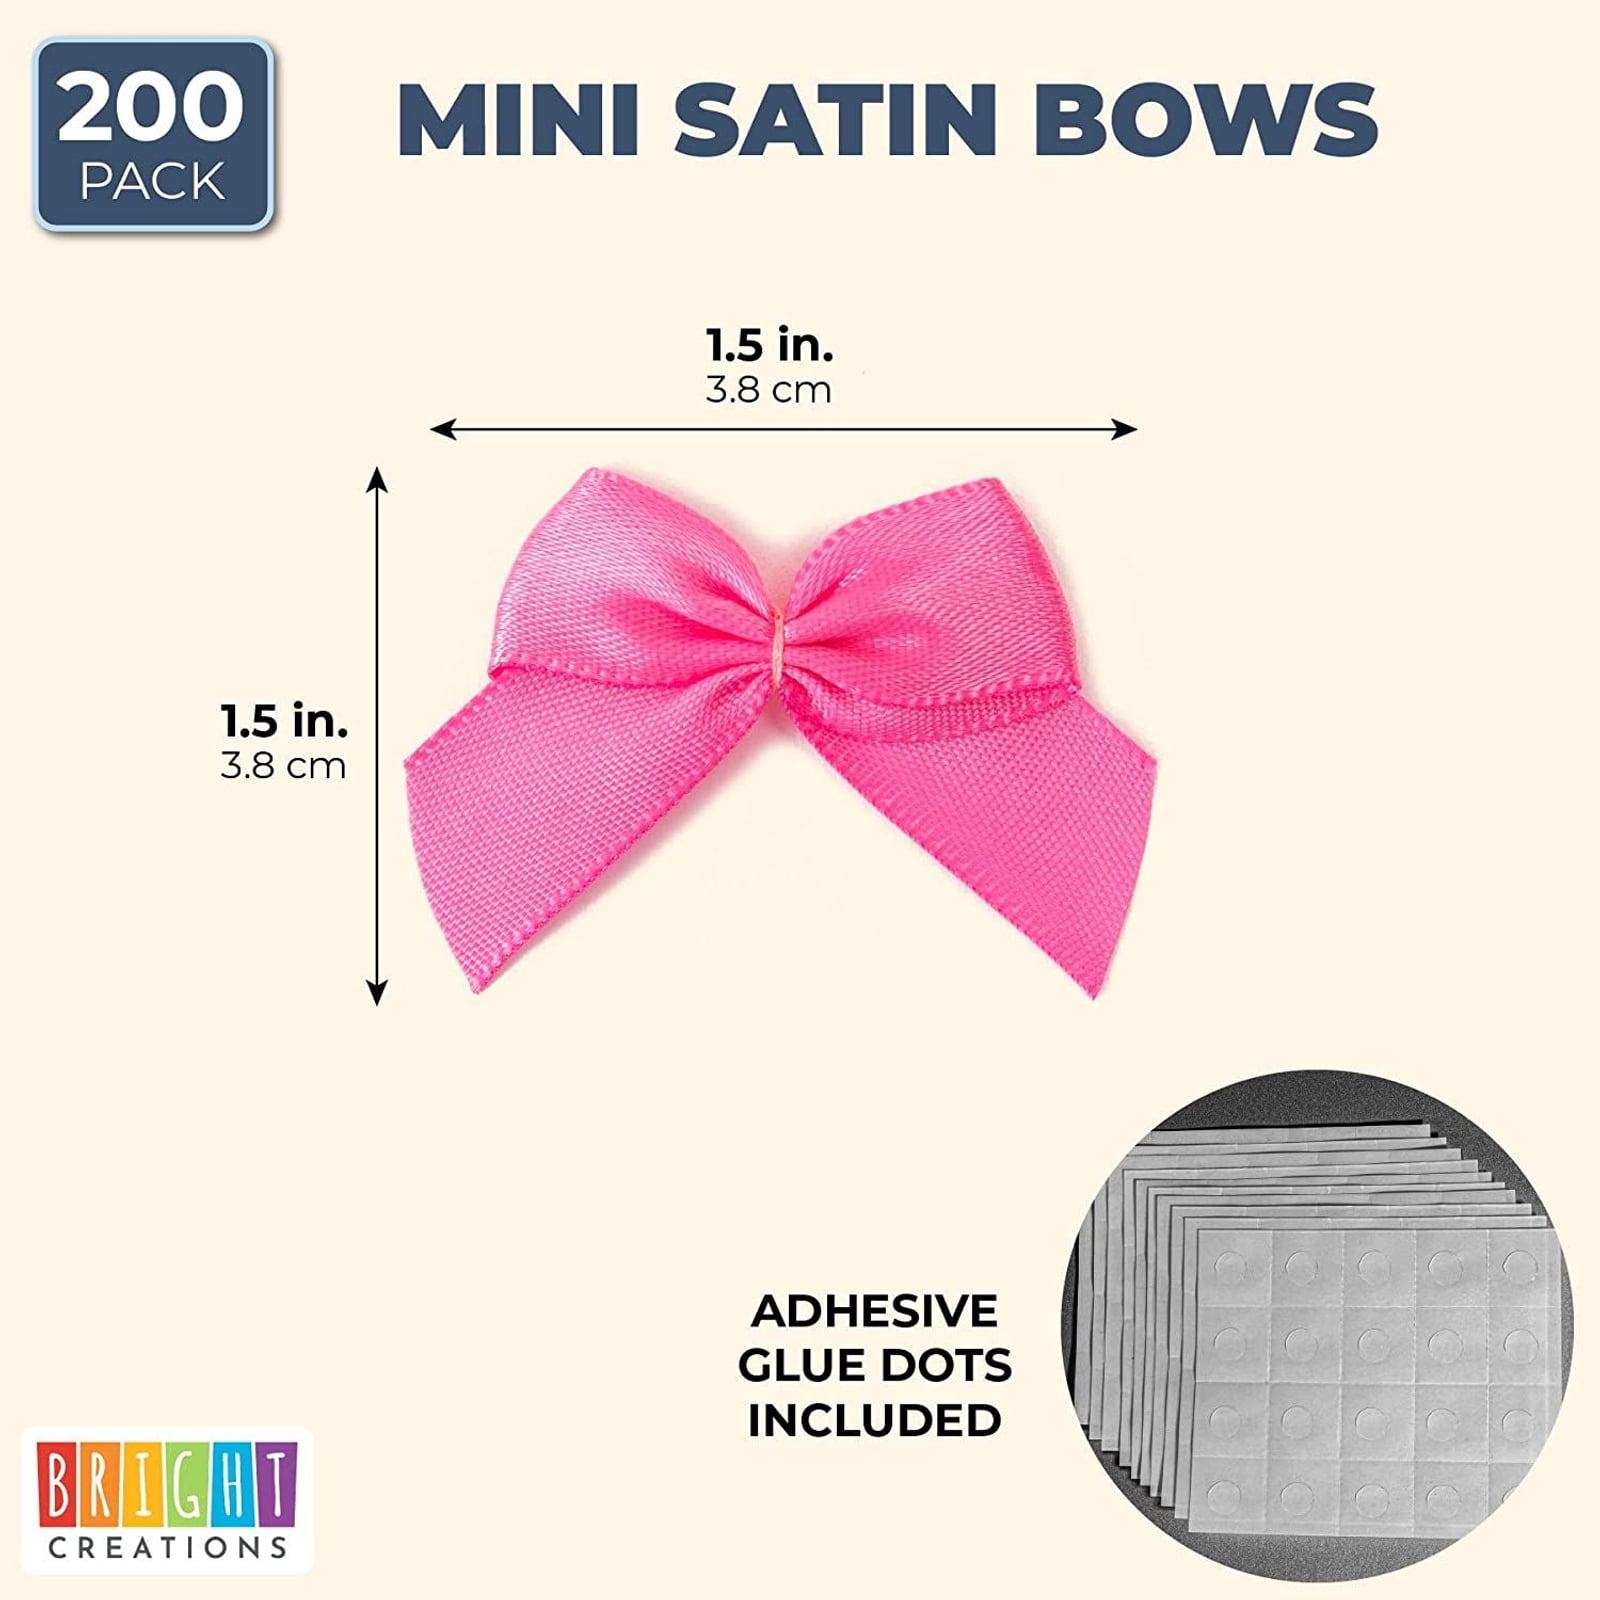 200 Pack Mini Black Satin Bows for Gift Wrapping, Self Adhesive Ribbons for  DIY Crafts, Scrapbooking, 1.5 in